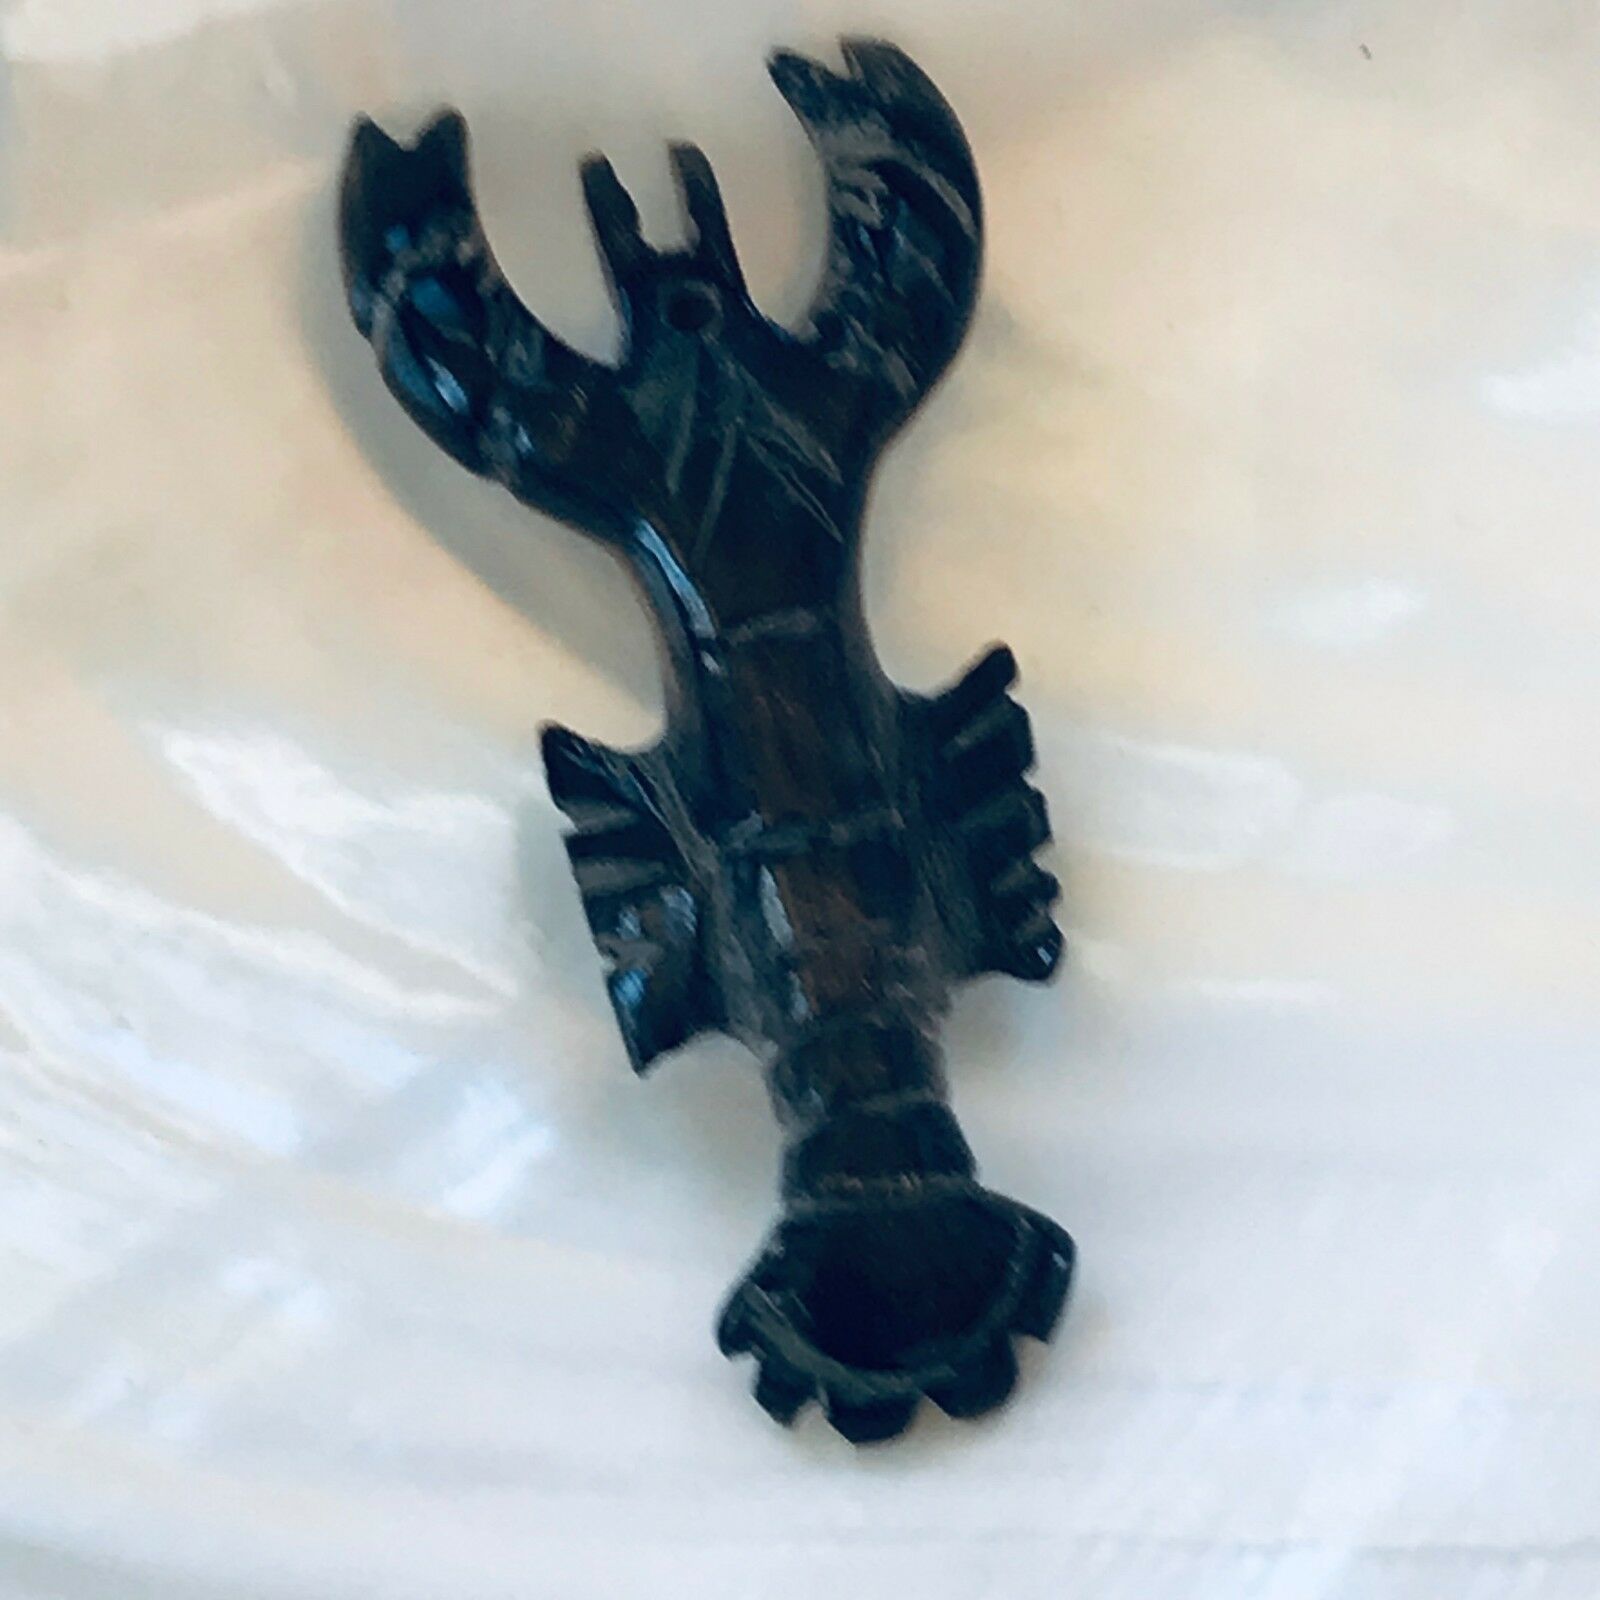 Primary image for Vintage Large Carved Brown Plastic Resin Scorpion or Crawdad Pendant – 1.25 x 2.